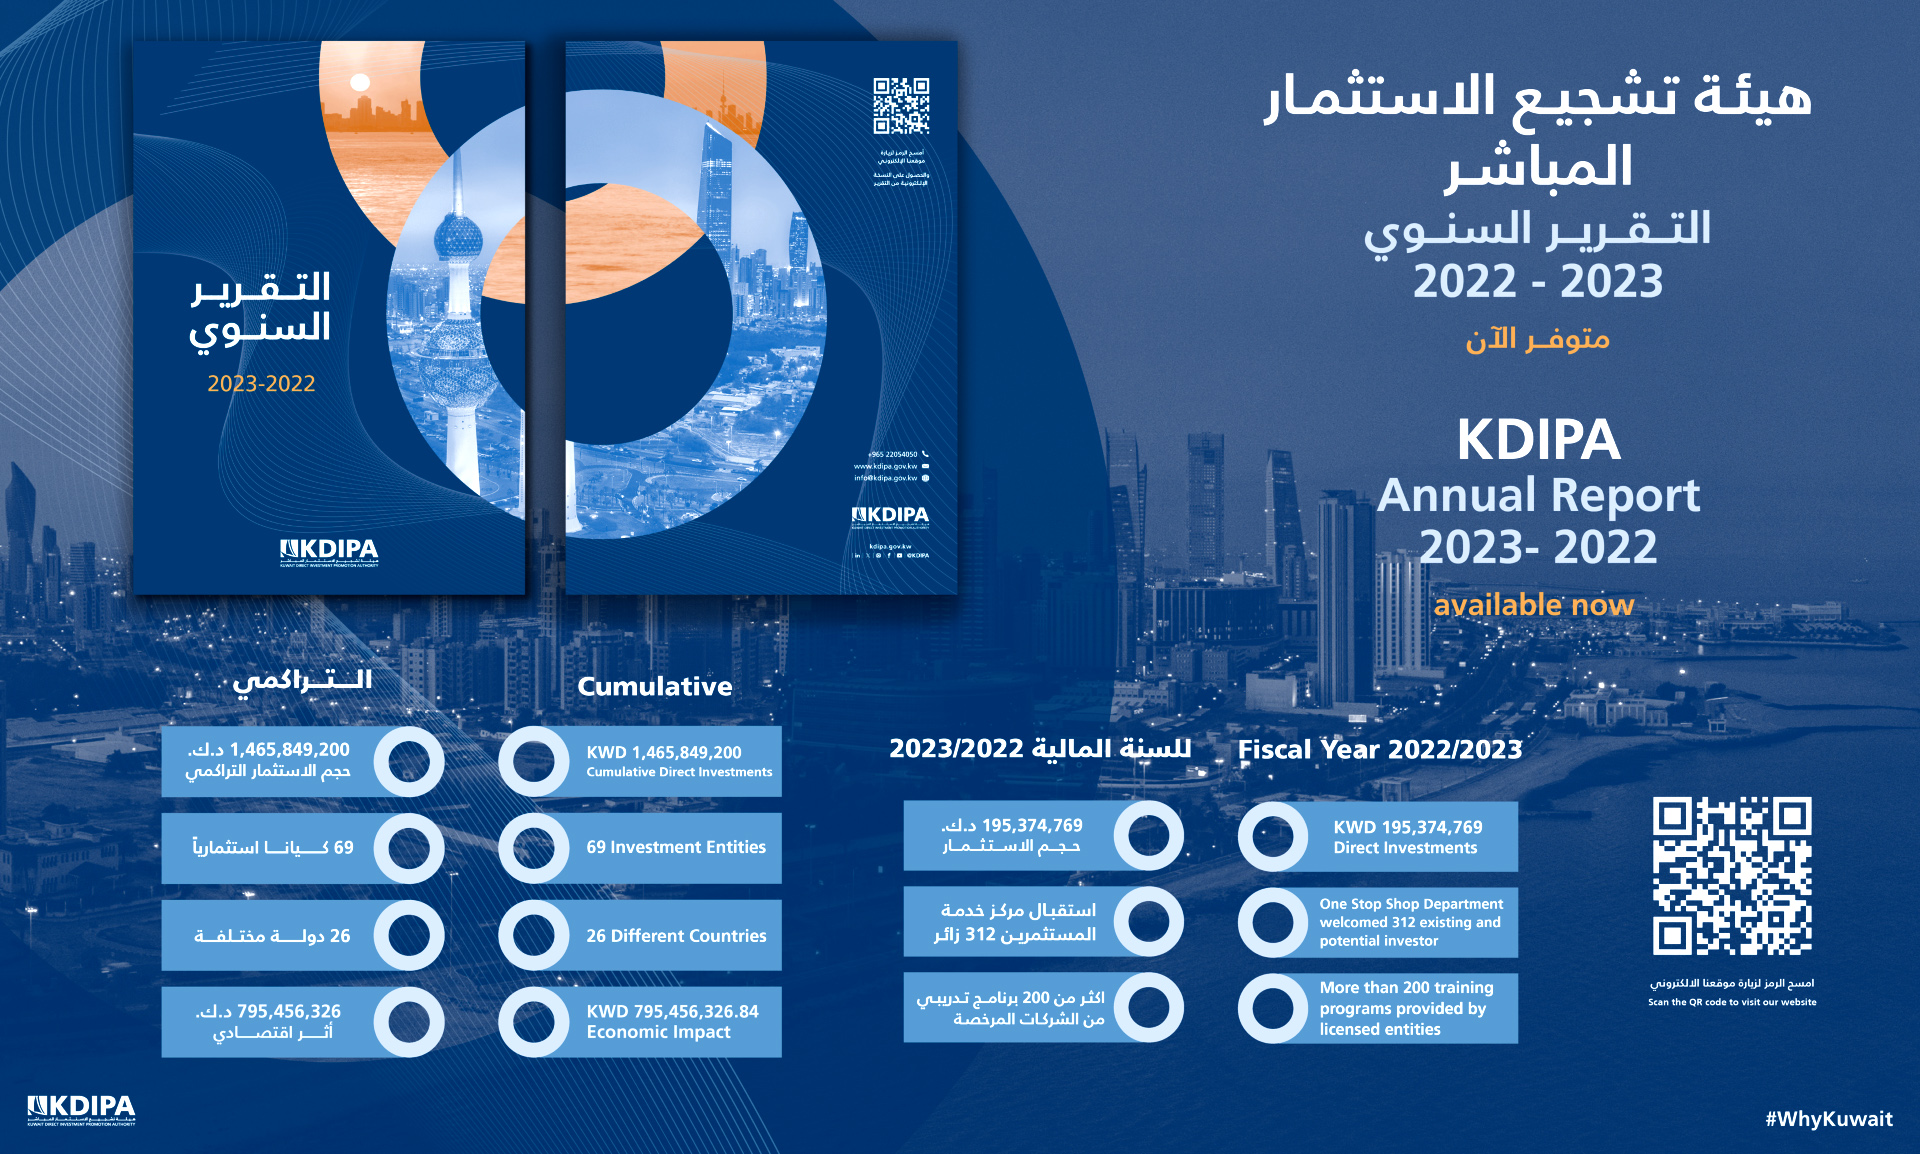 Kuwait investment promotion body issues fiscal year 2022/23 report